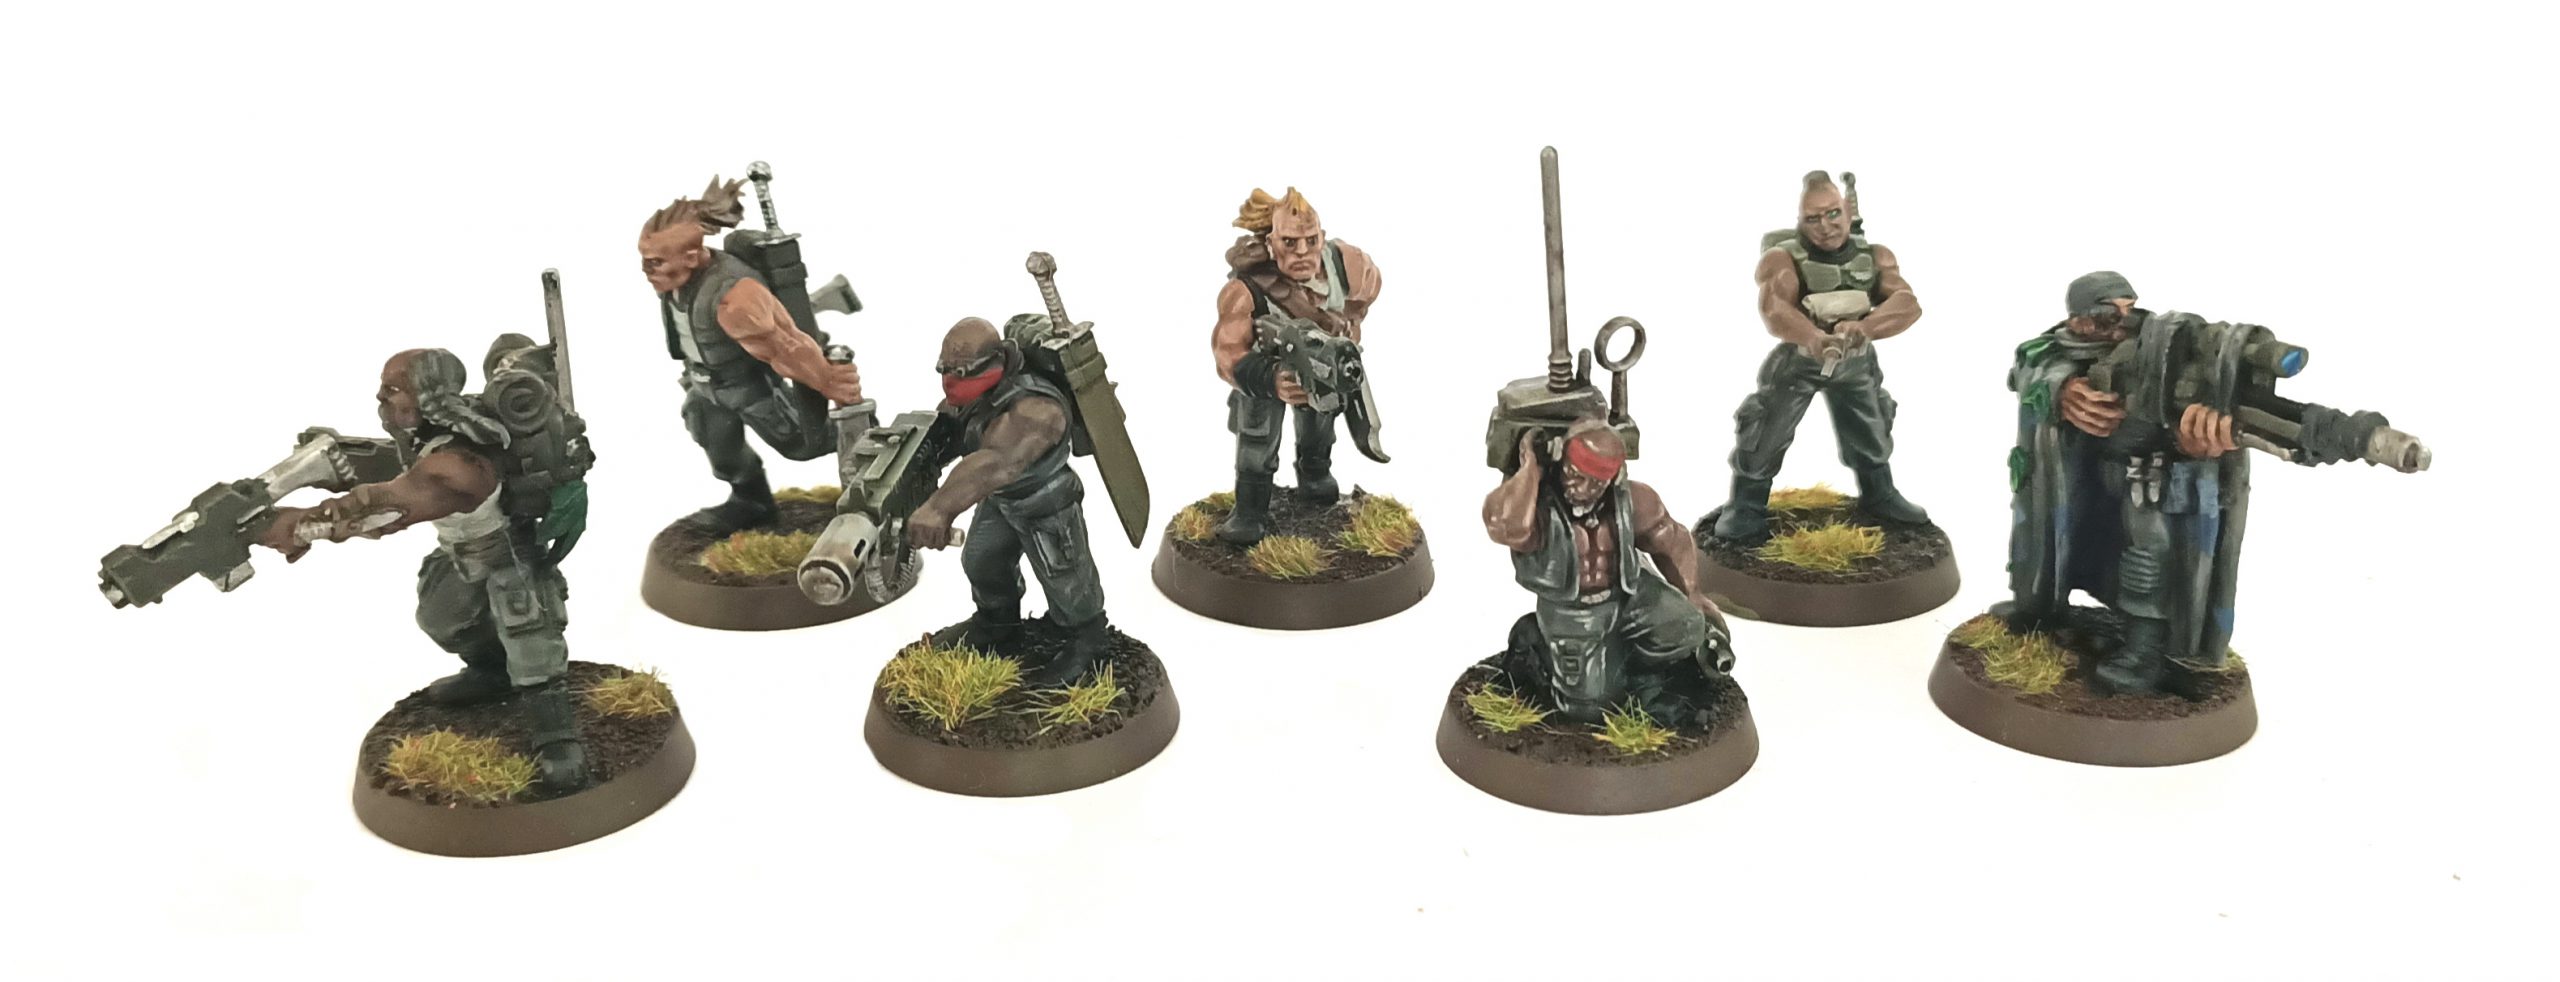 Down in the Mud and Blood – Veteran Guardsmen in Kill Team